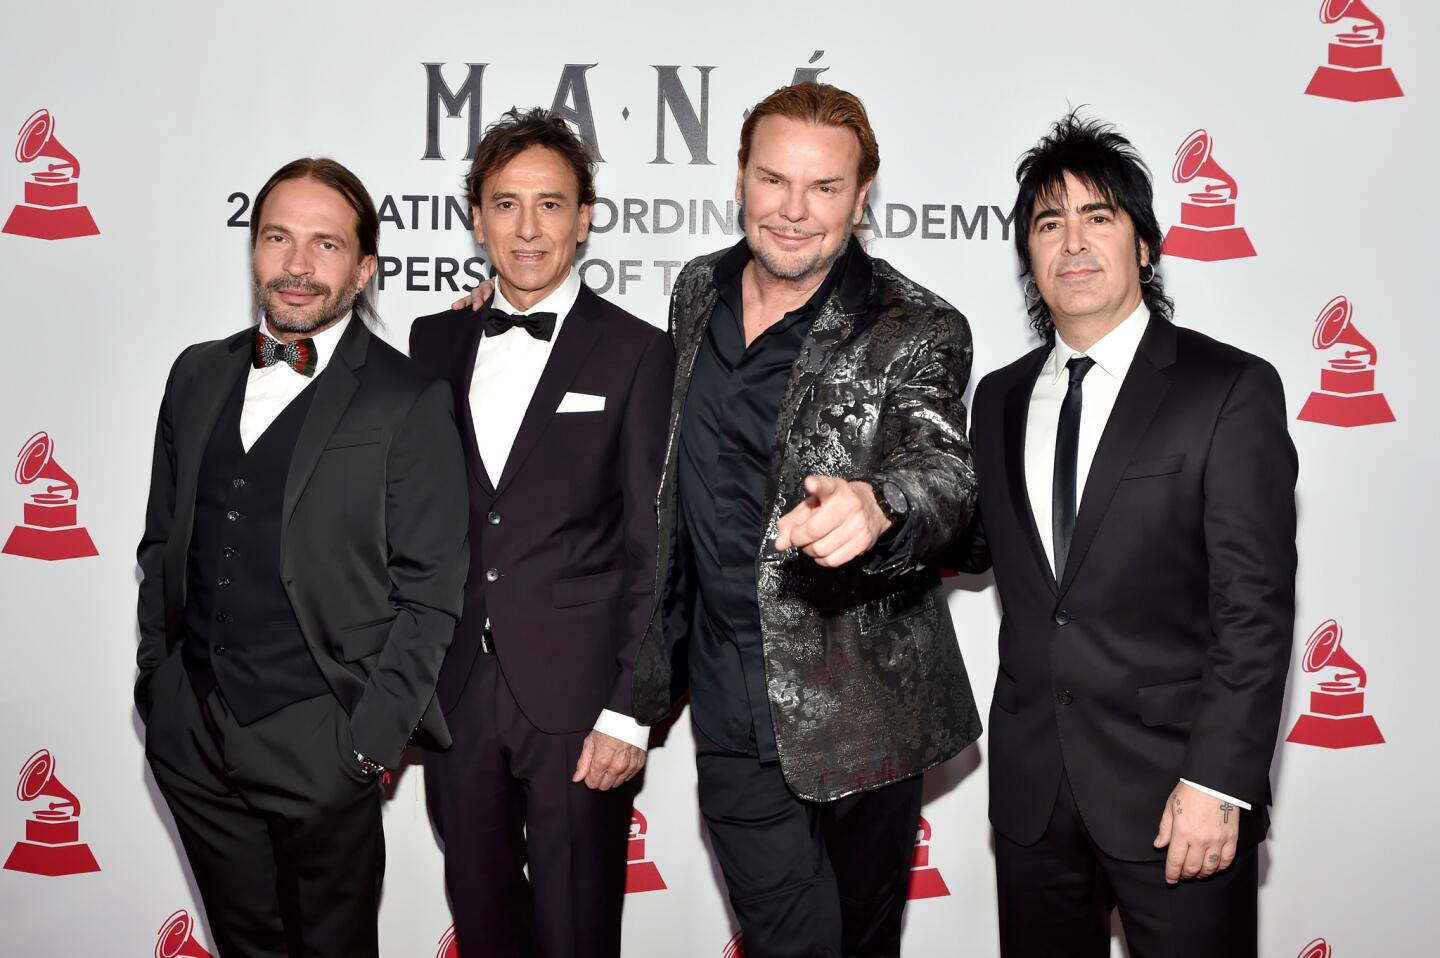 The 19th Annual Latin GRAMMY Awards - Person Of The Year Gala Honoring Mana - Arrivals